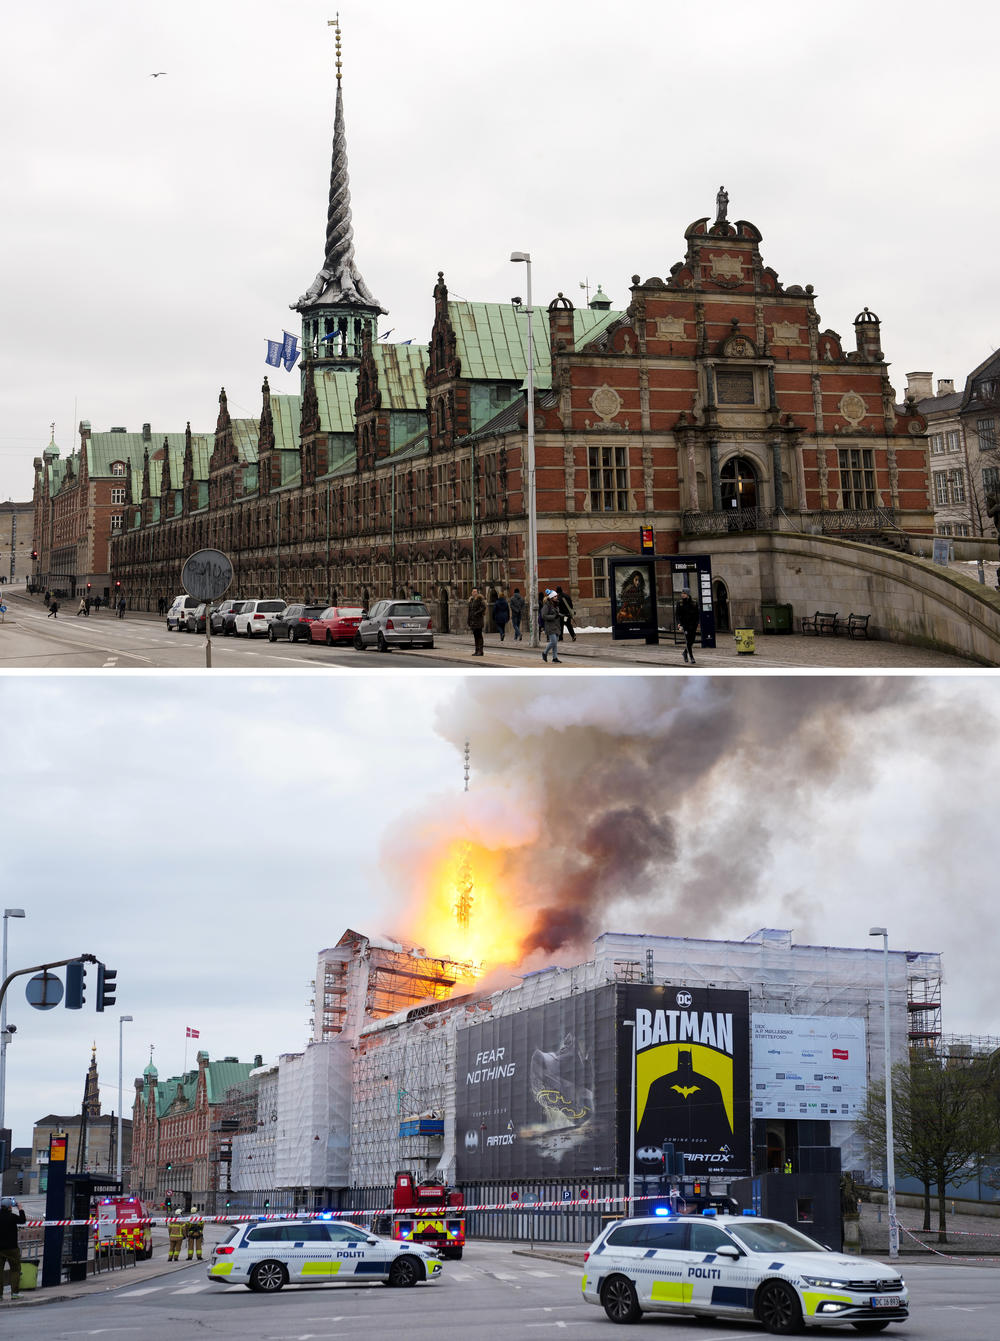 This photo combo shows the Old Stock Exchange in Copenhagen in 2019, top, and on fire on Tuesday below. The building is situated next to the Christiansborg Palace and is a popular tourist attraction.